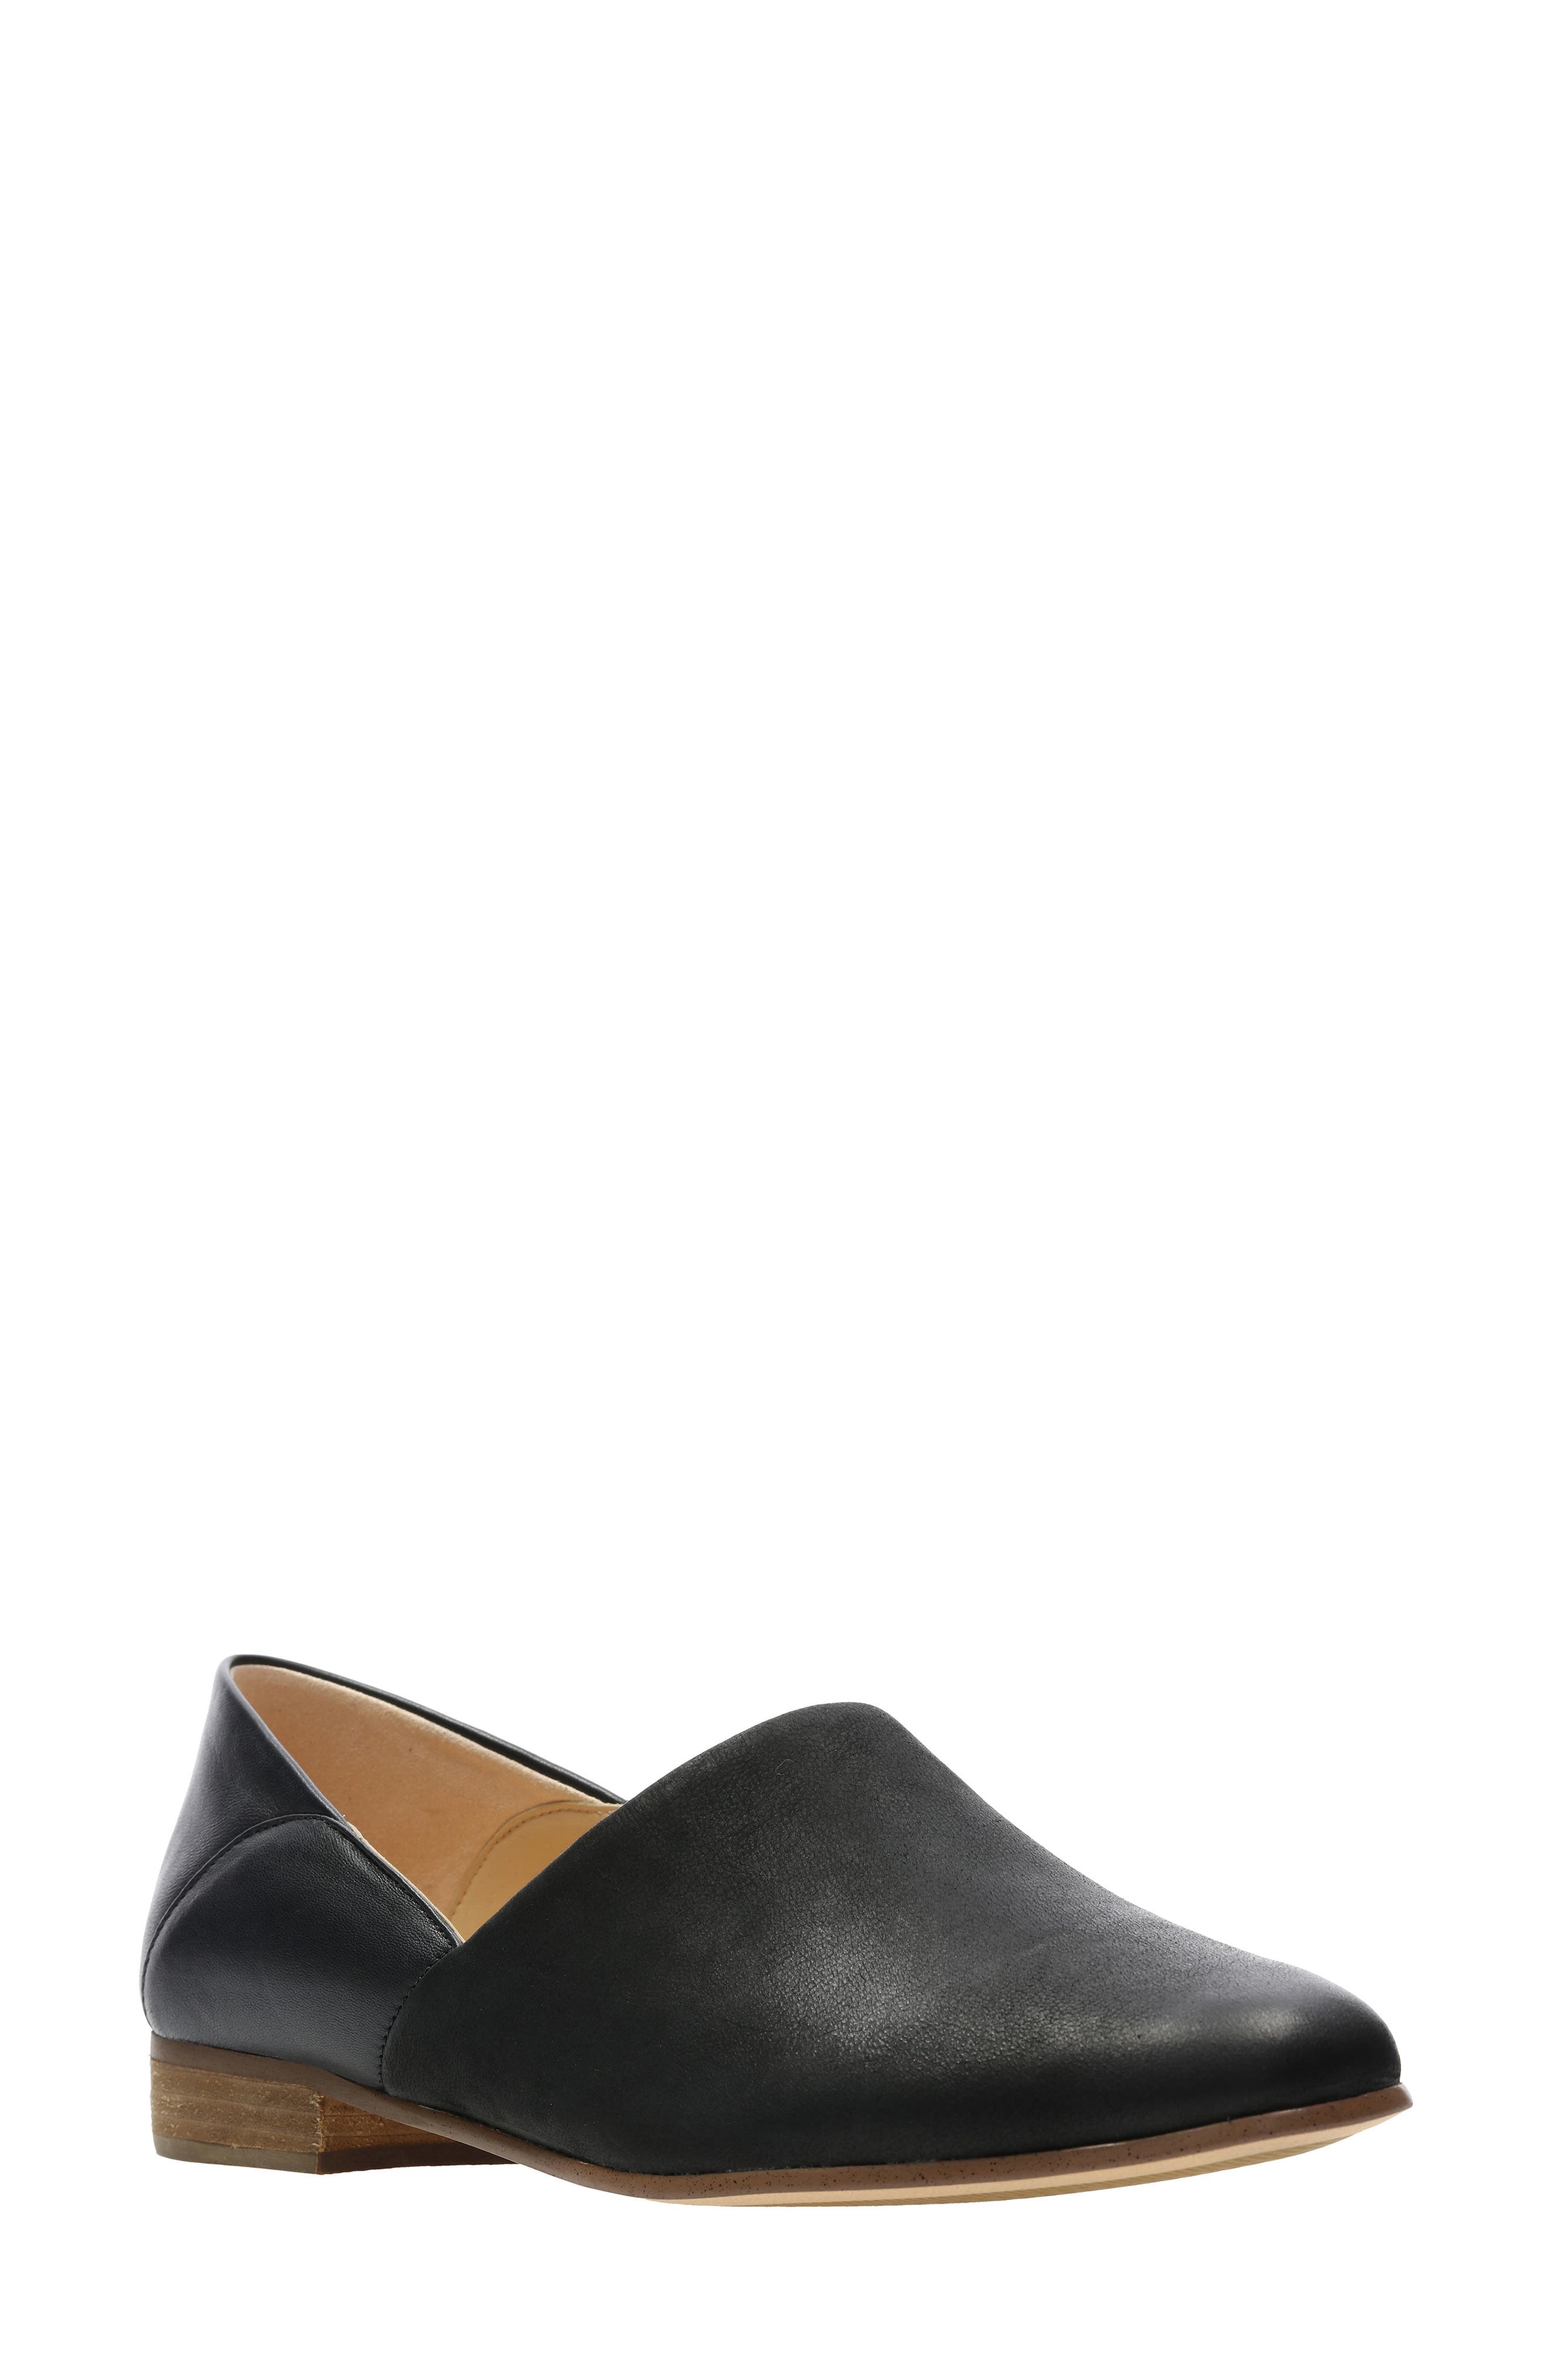 clarks women's leather flats